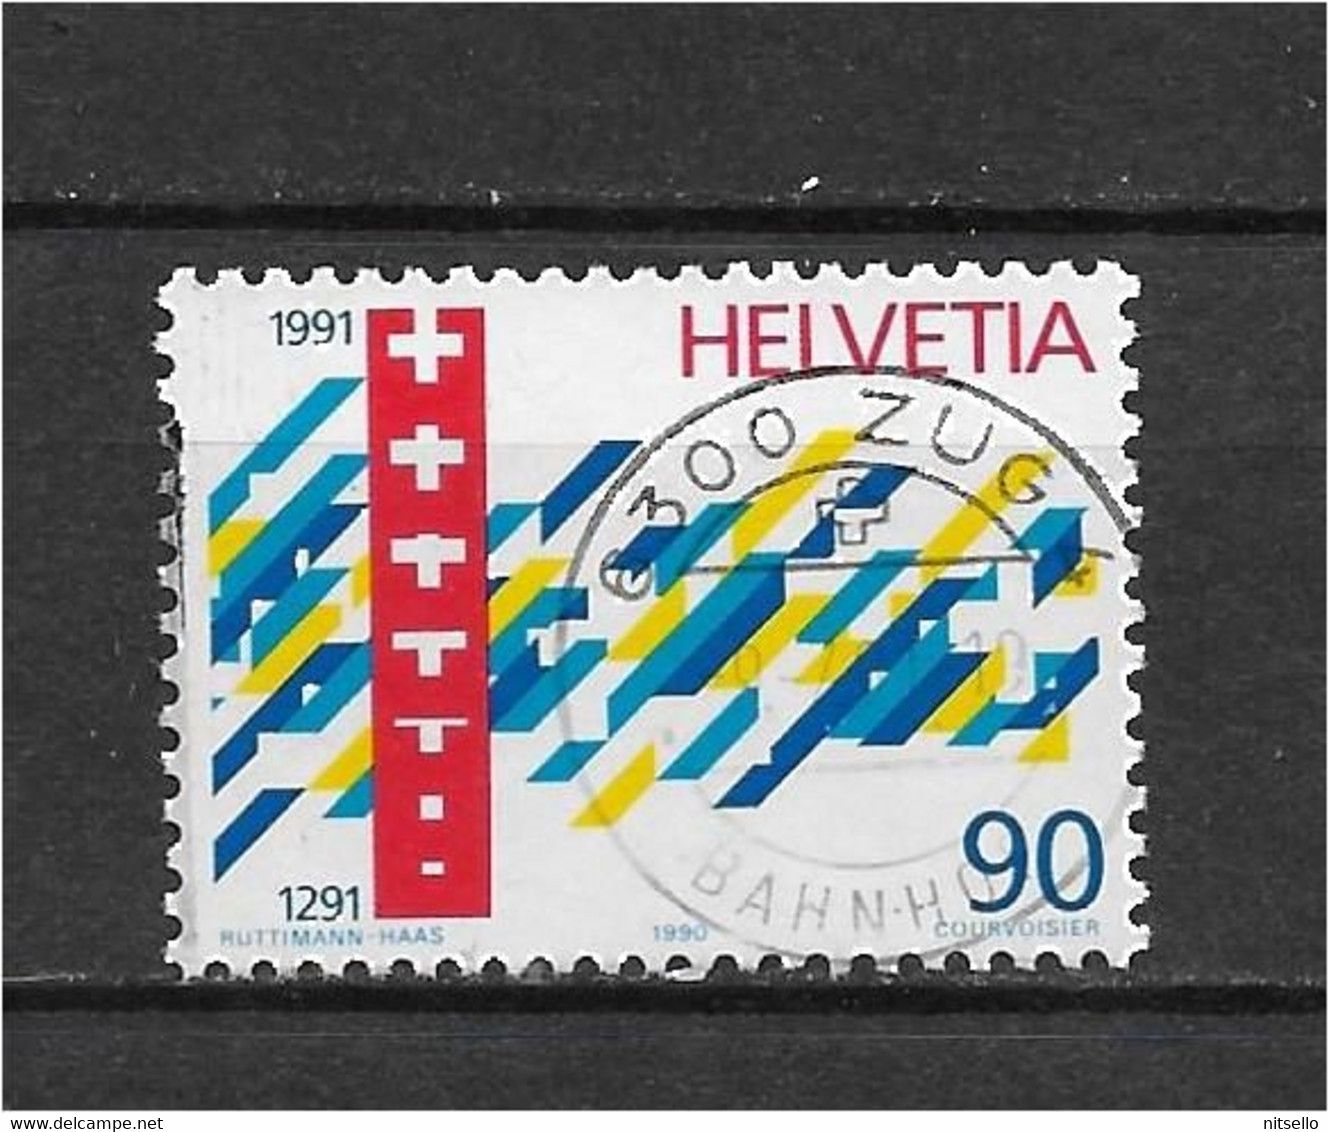 LOTE 1530A /// SUIZA YVERT Nº: 1354  ¡¡¡ OFERTA - LIQUIDATION - JE LIQUIDE !!! - Used Stamps